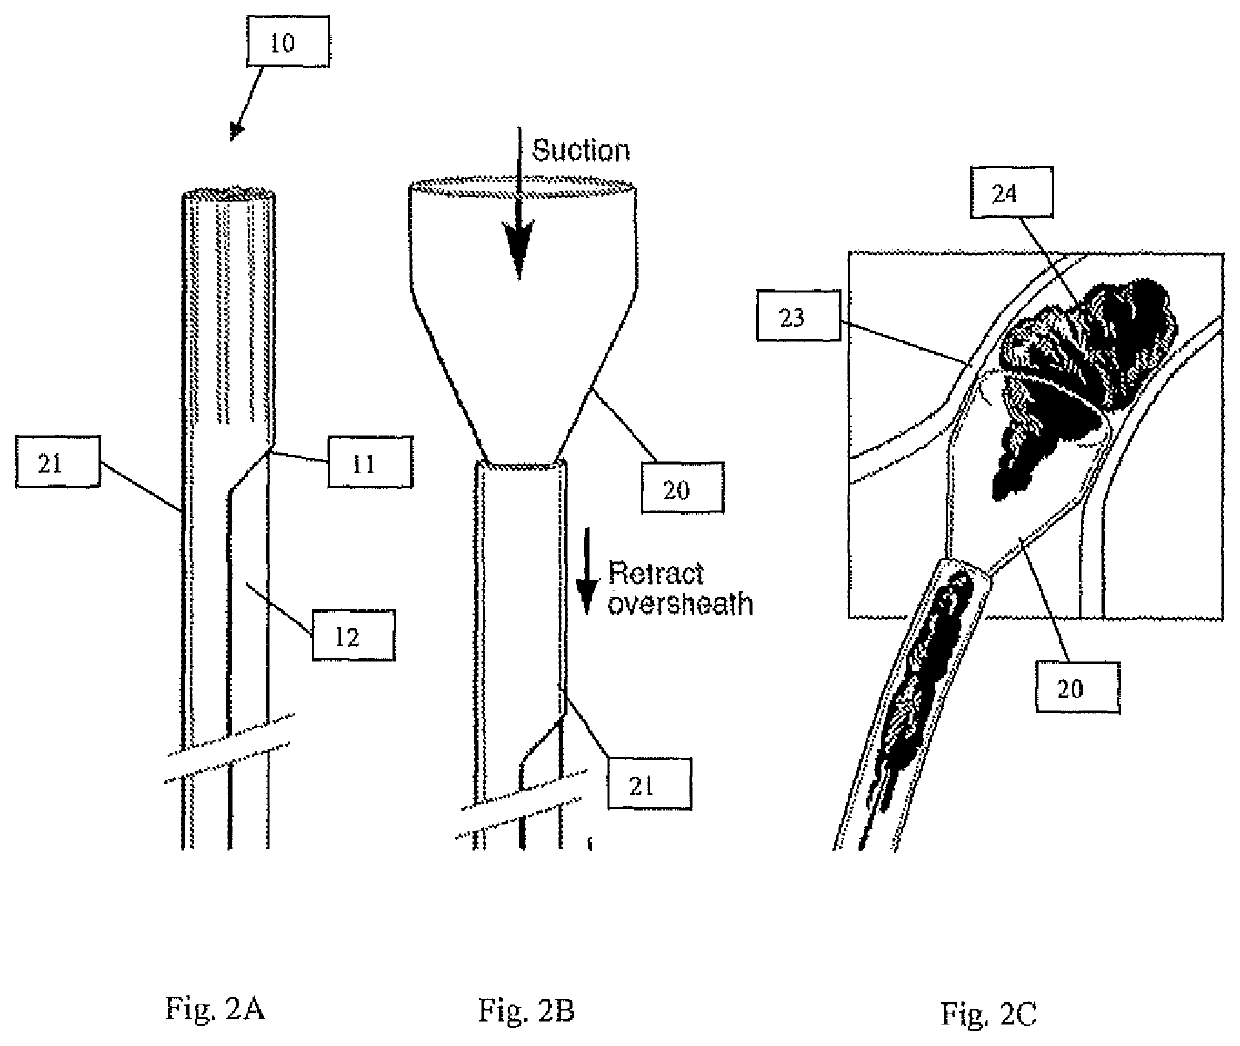 Systems and methods for removing undesirable material within a circulatory system utilizing a balloon catheter